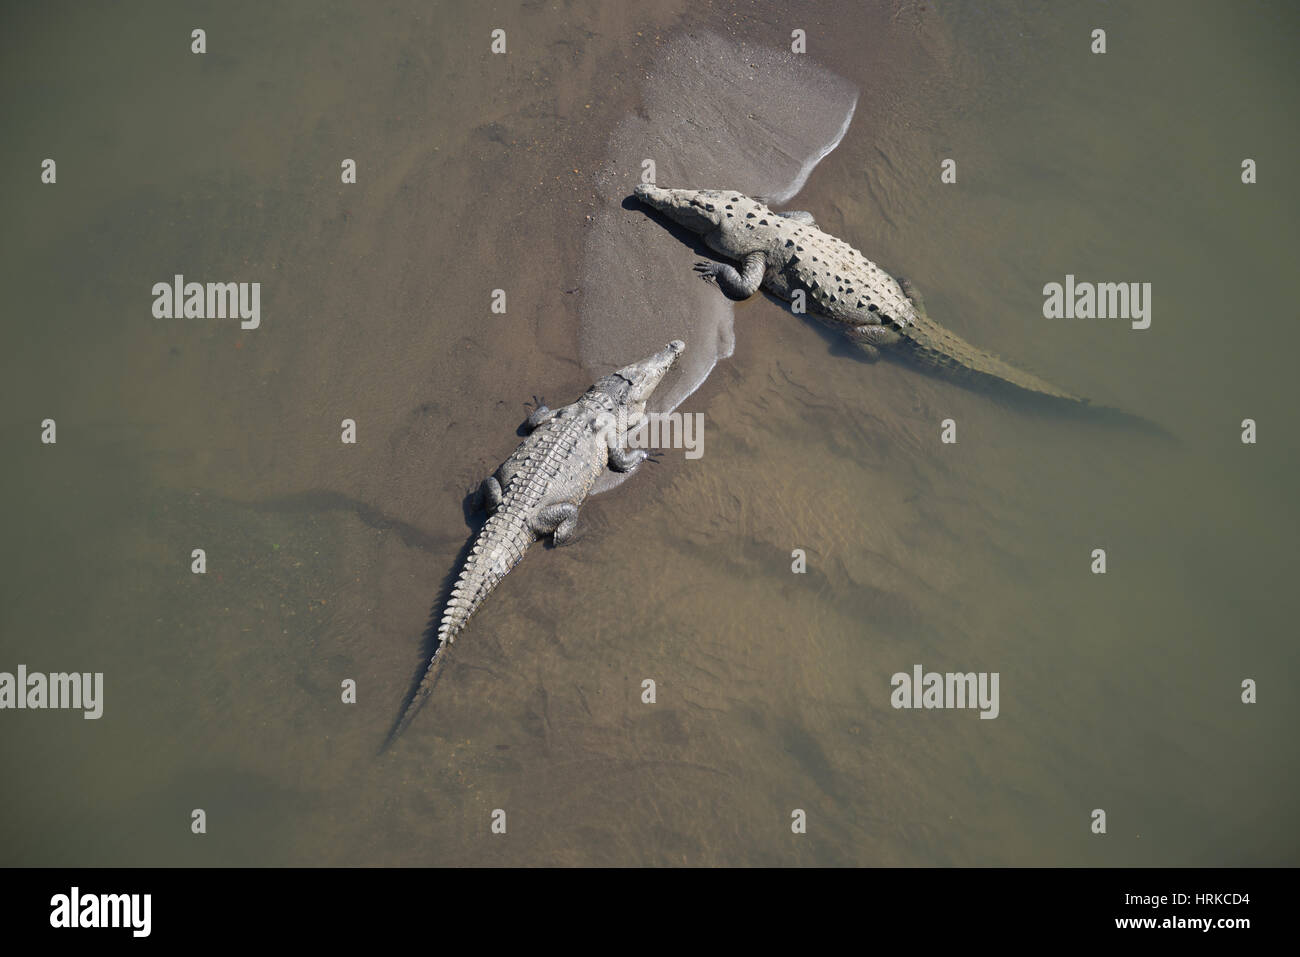 Crocodiles basking on a sand bank in a river in Costa Rica. Stock Photo